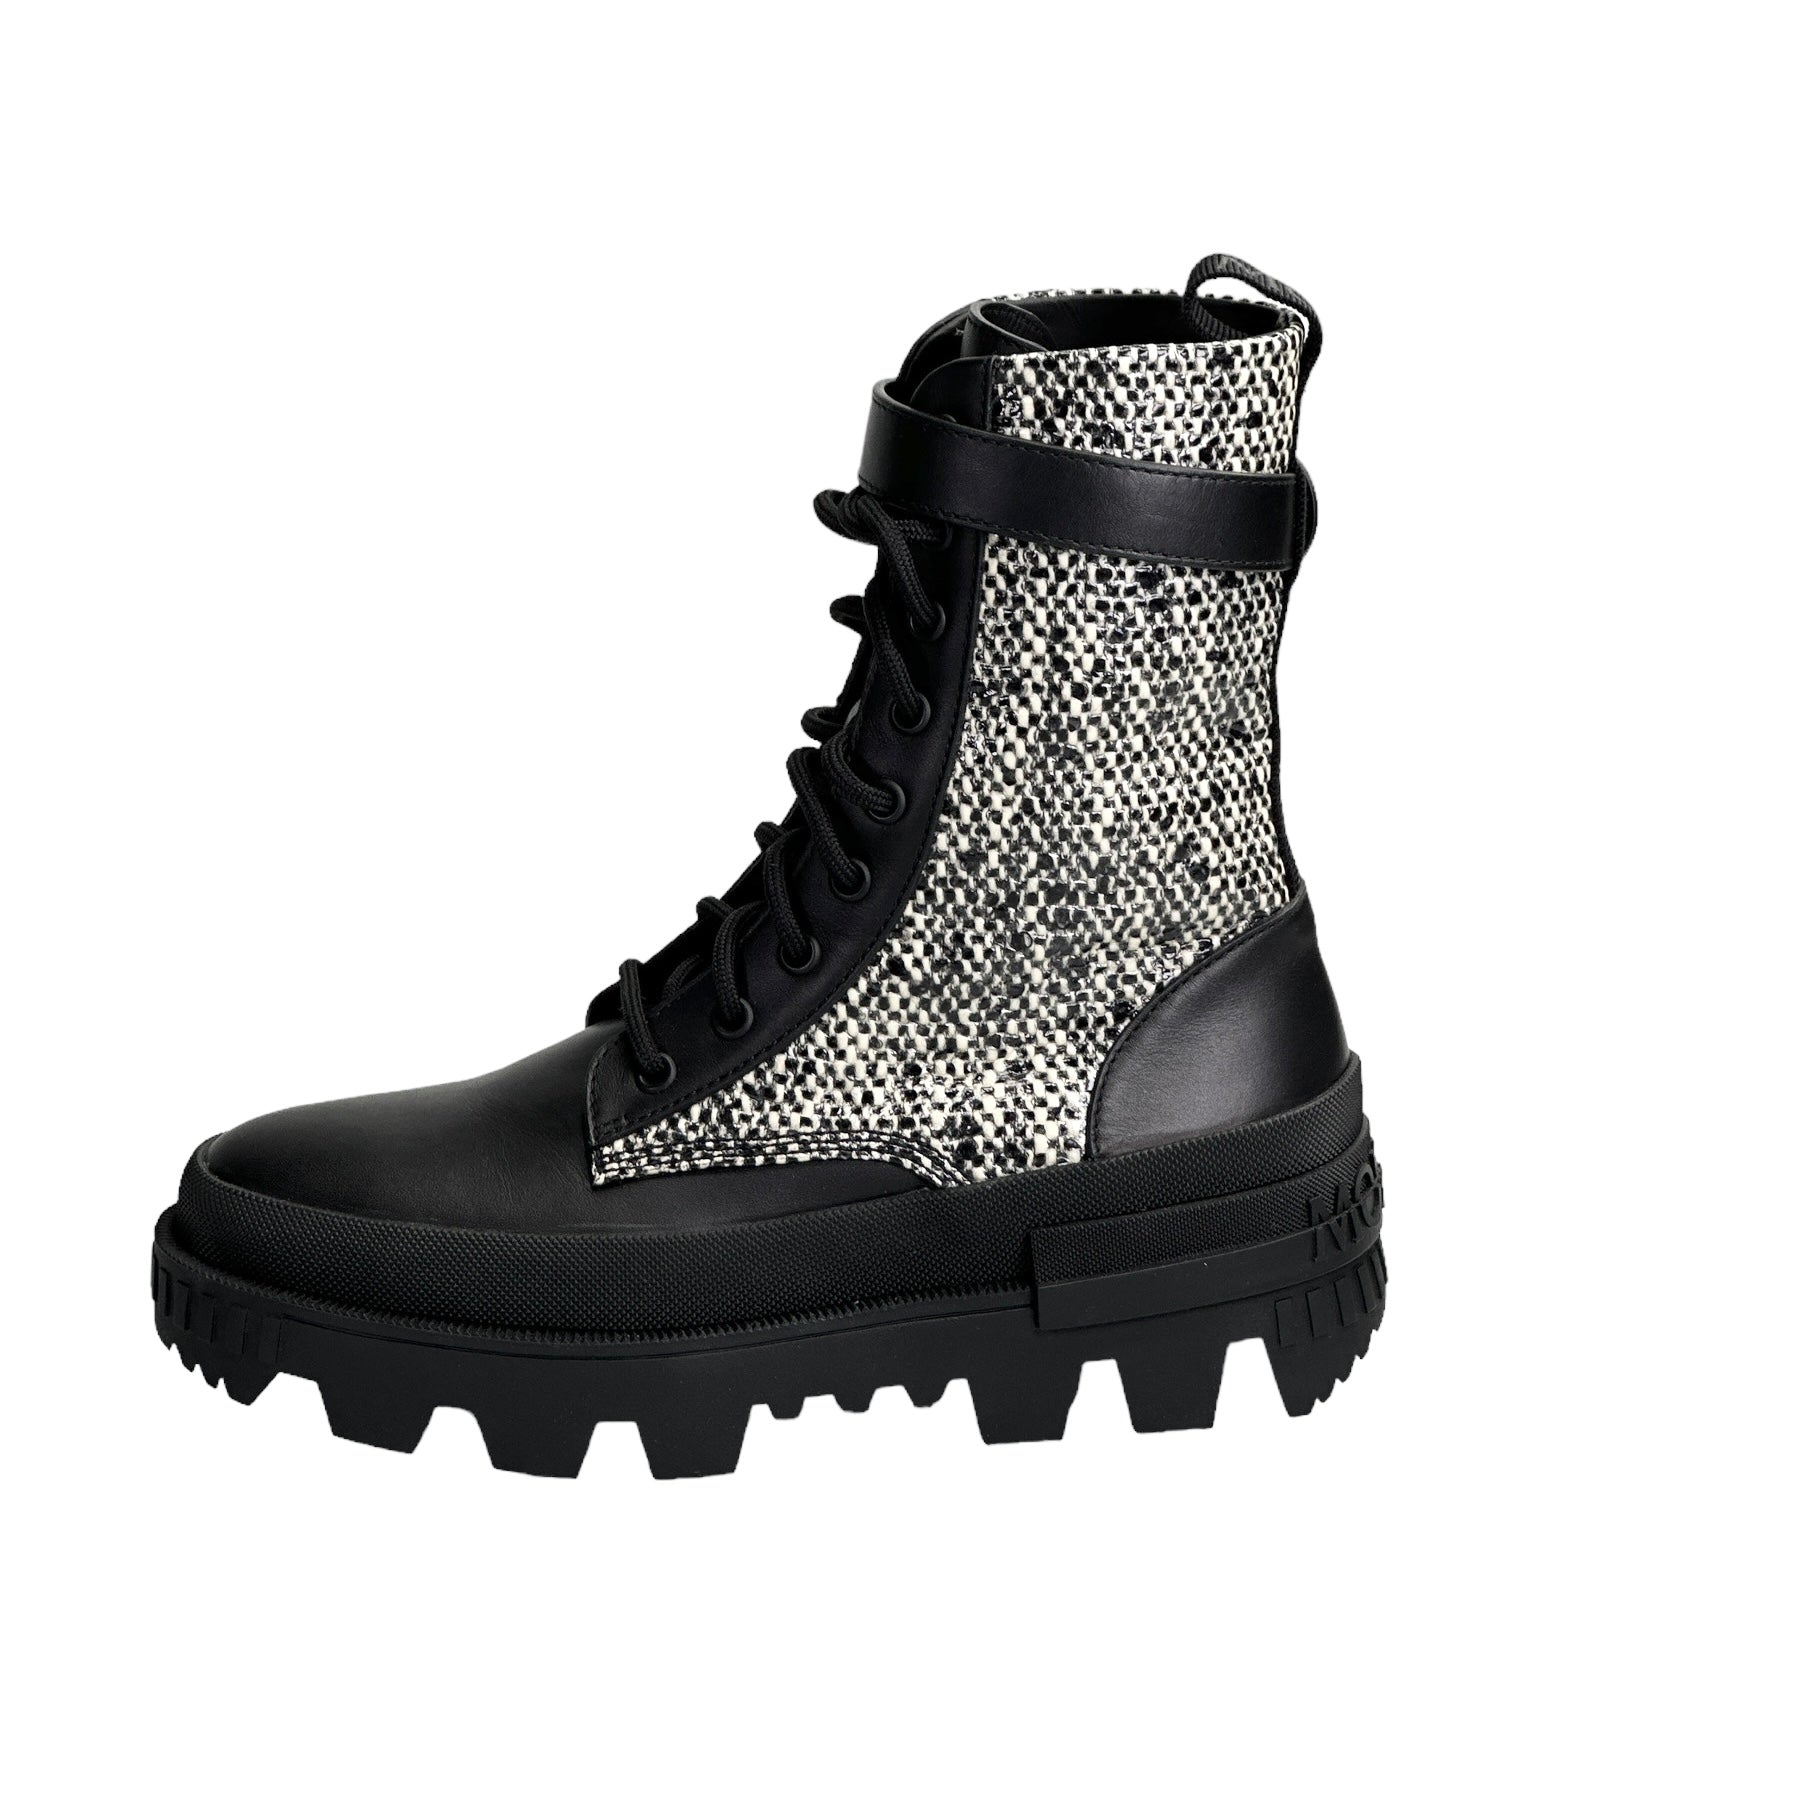 Moncler CARINNE tweed-panelled mid-calf boots